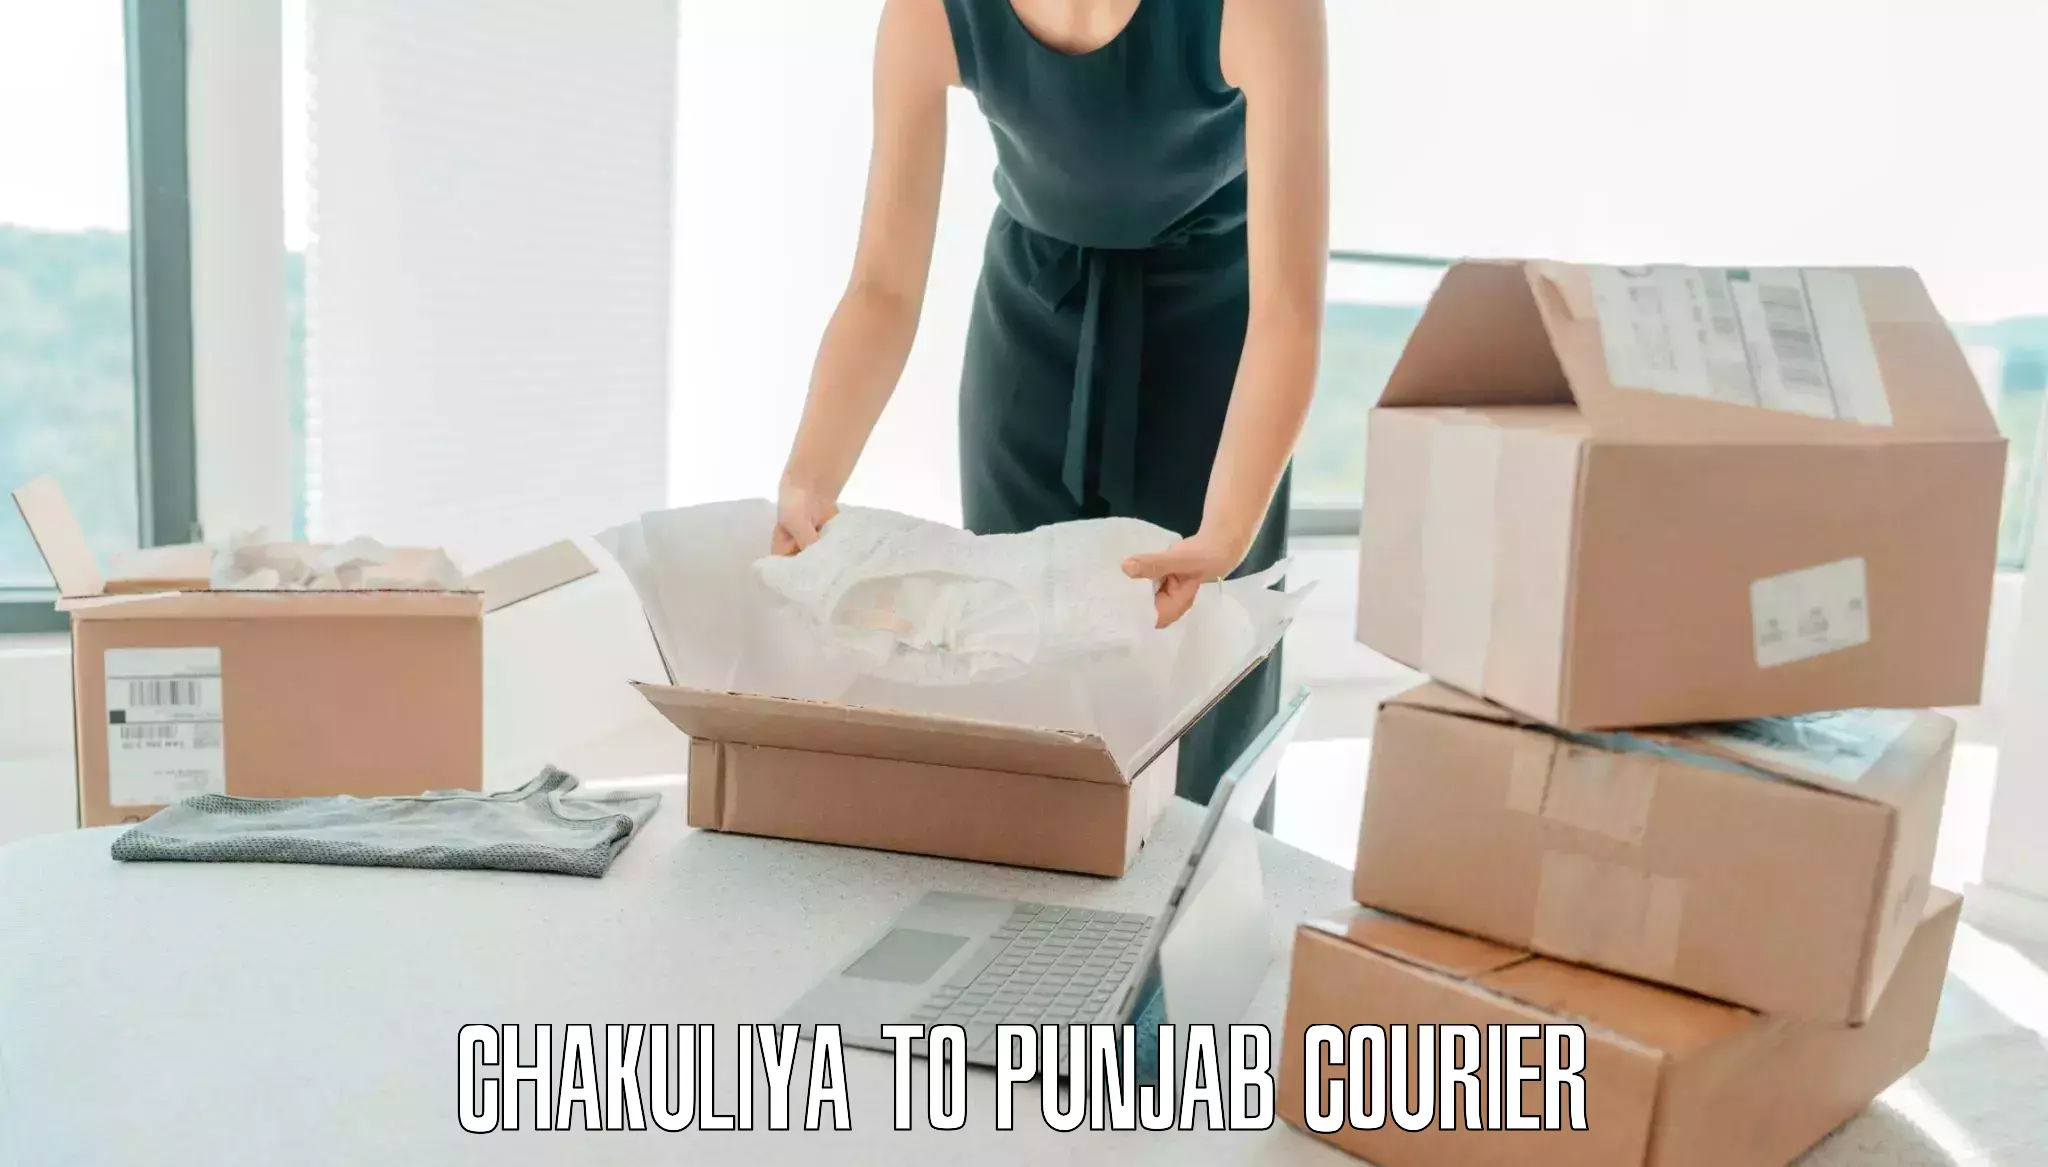 Baggage delivery planning Chakuliya to Sultanpur Lodhi